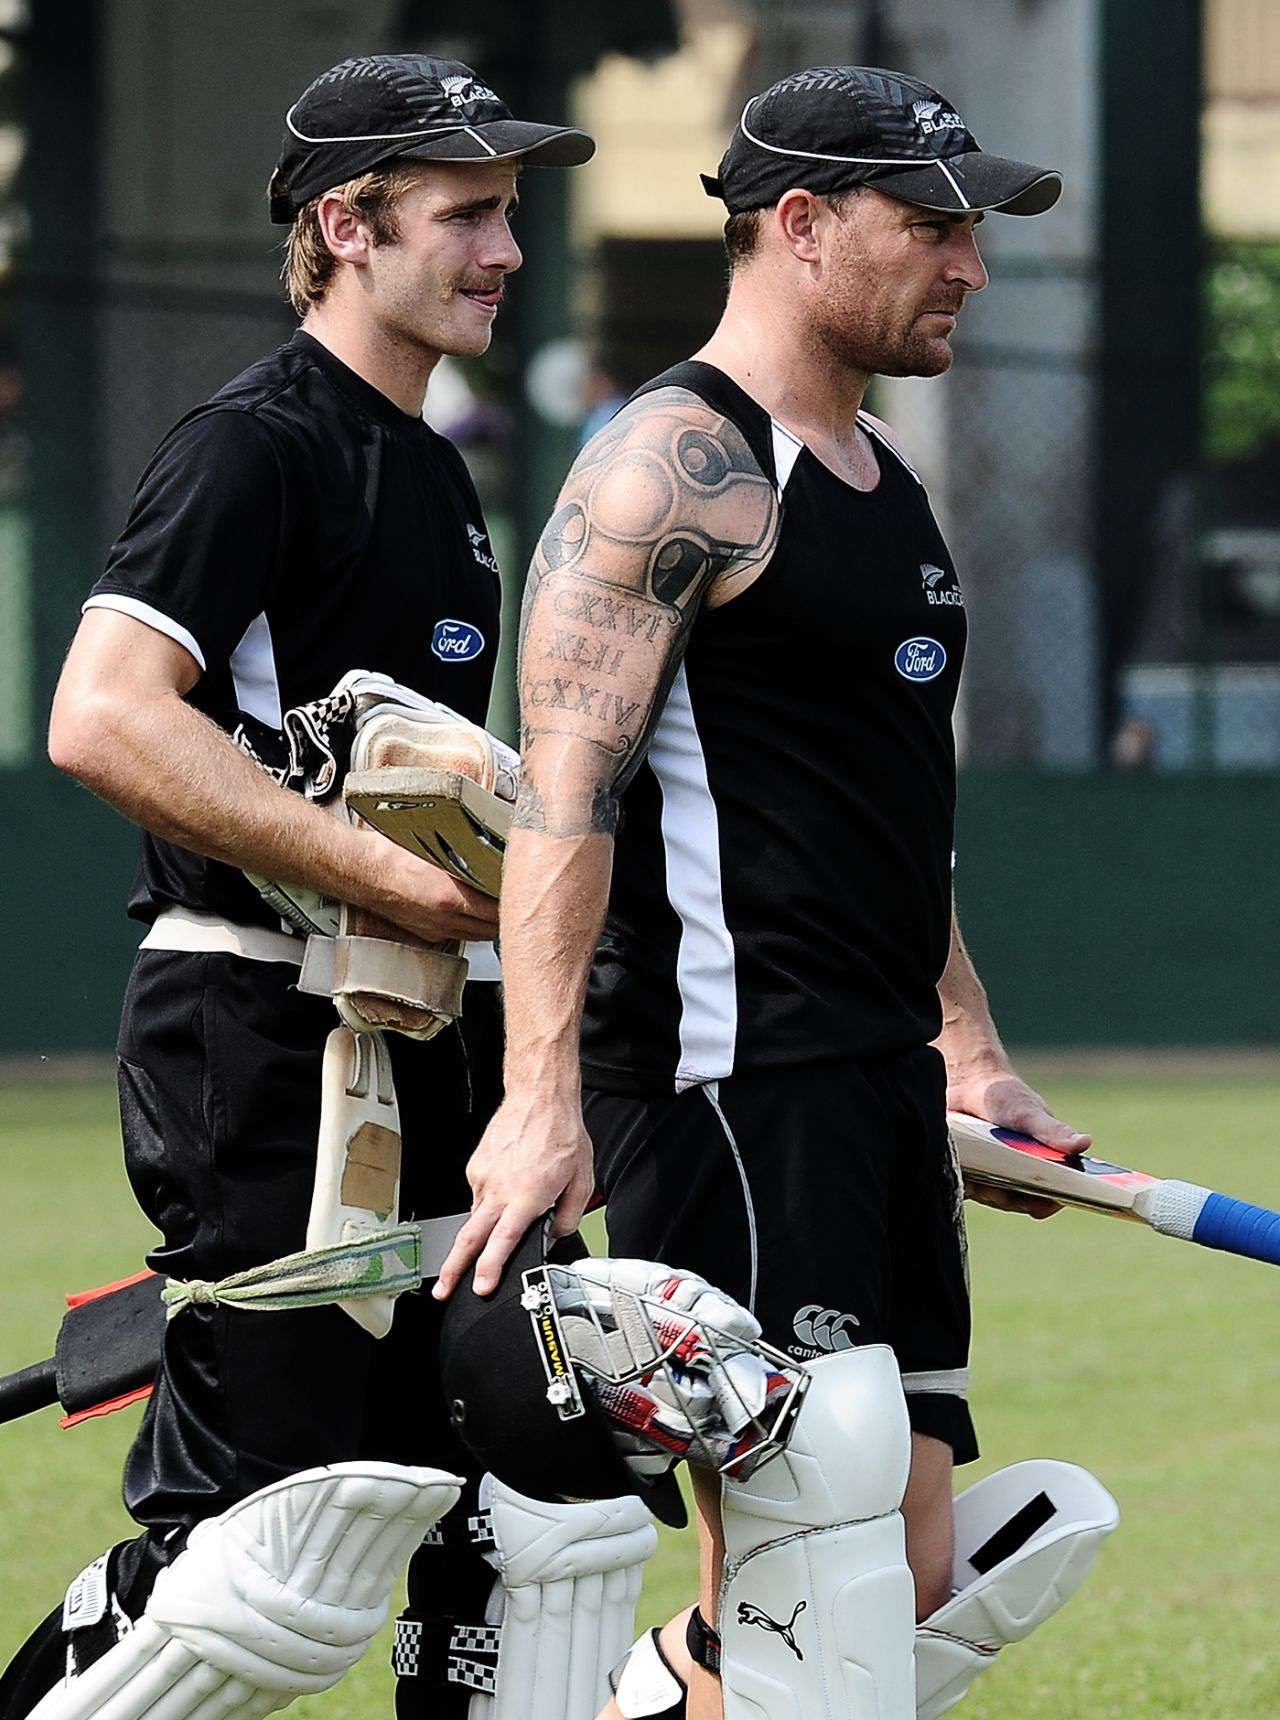 Kane Williamson and Brendon McCullum at practice, Colombo, November 22, 2012